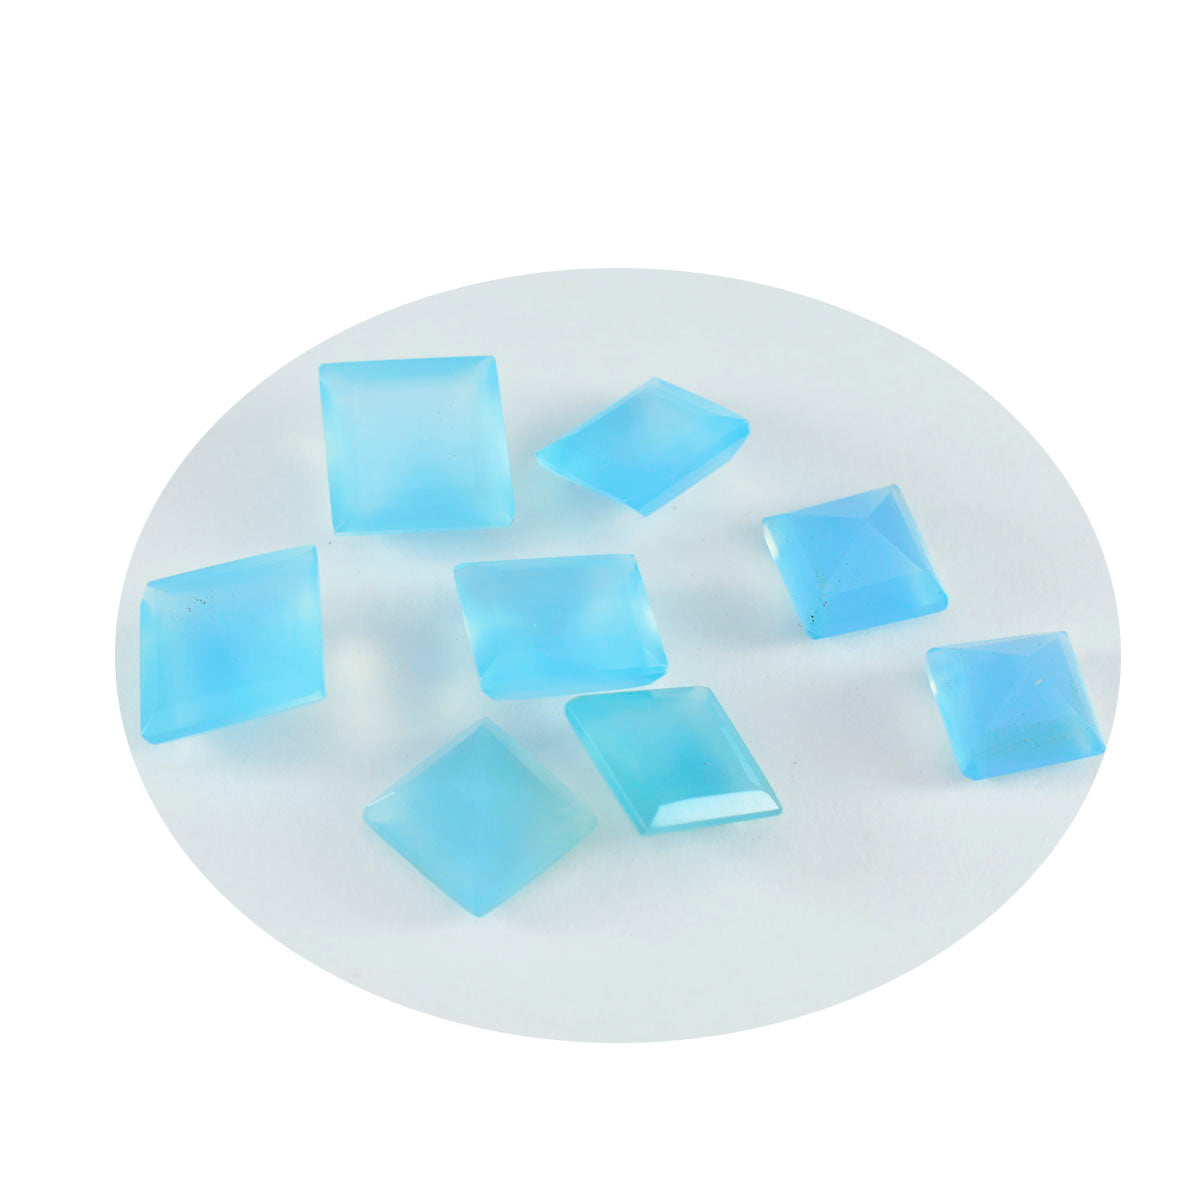 Riyogems 1PC Real Blue Chalcedony Faceted 5x5 mm Square Shape A+ Quality Gemstone